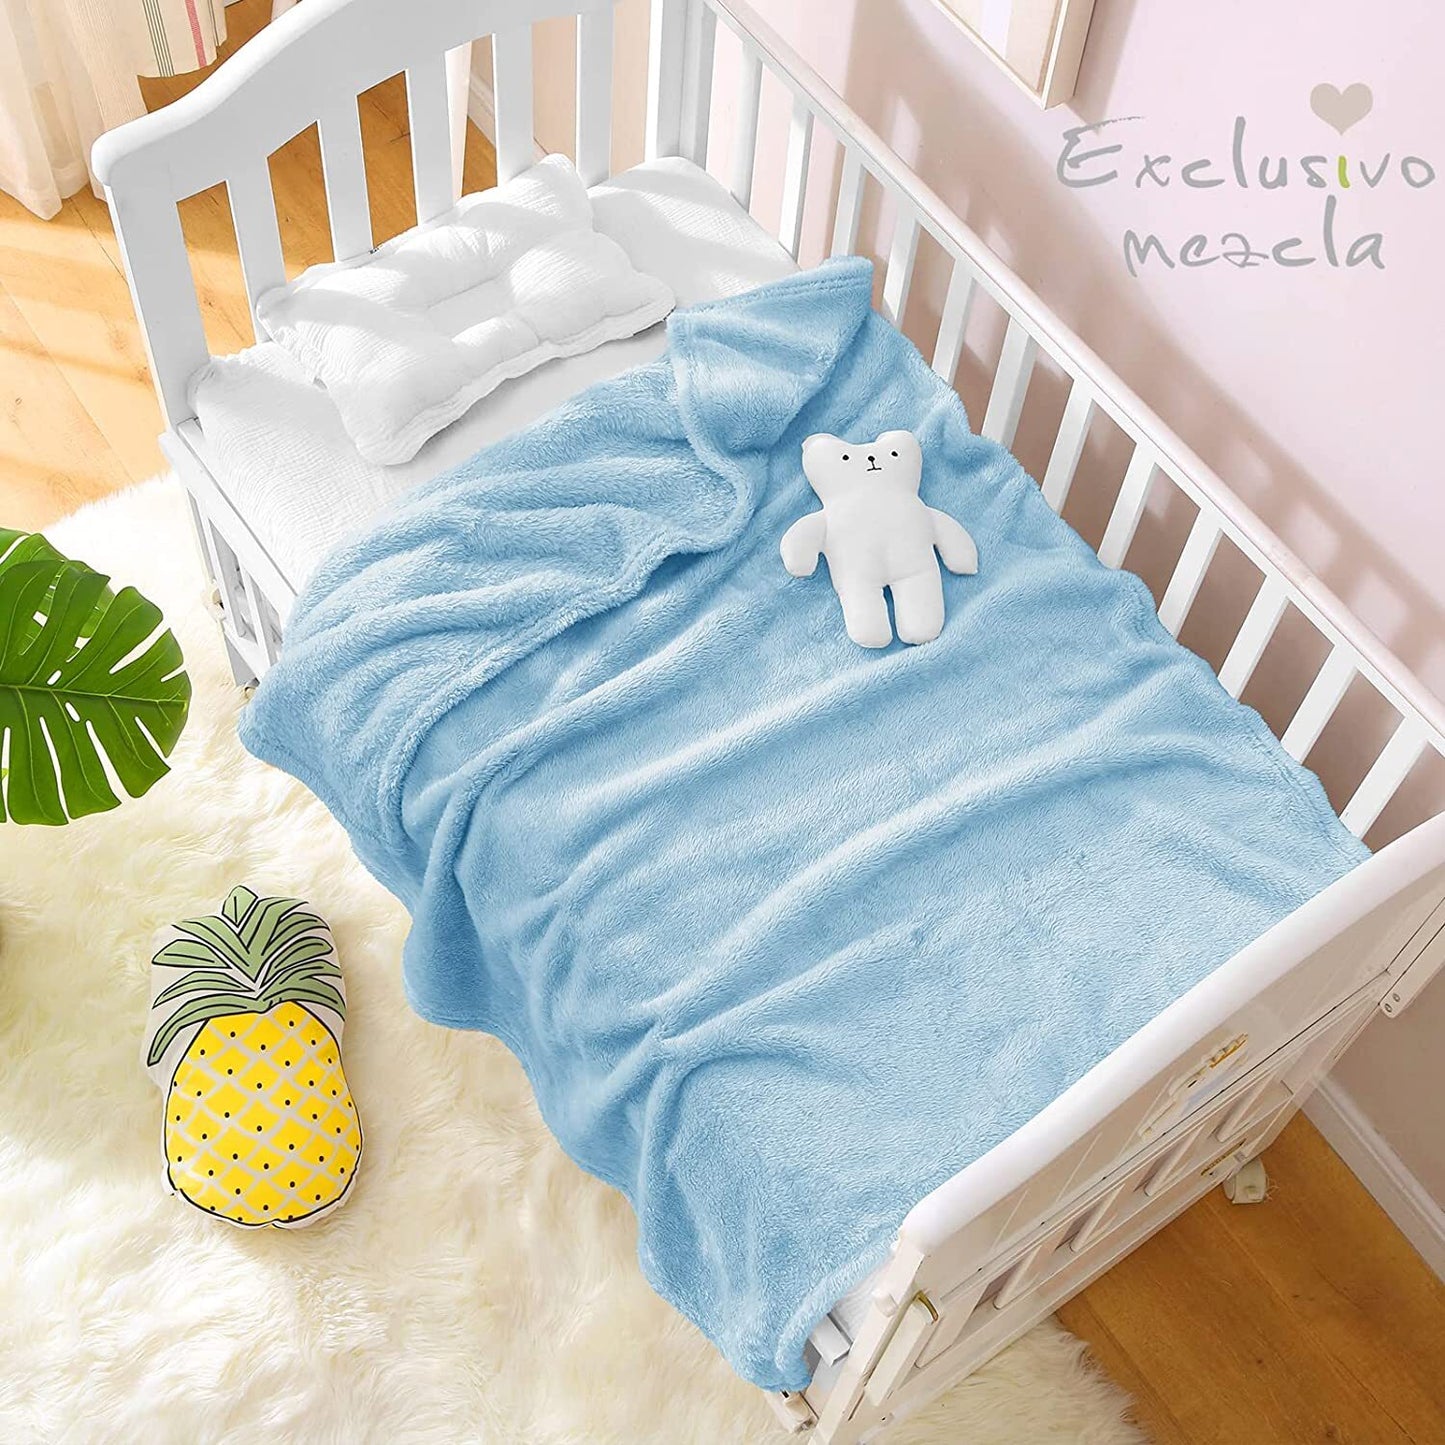 Exclusivo Mezcla Plush Baby Blanket, Soft and Warm Swaddle Throw Blanket, Infant, Newborn, Toddler and Kids Receiving Fleece Blankets for Crib Stroller (40x50 inches, Baby Blue)